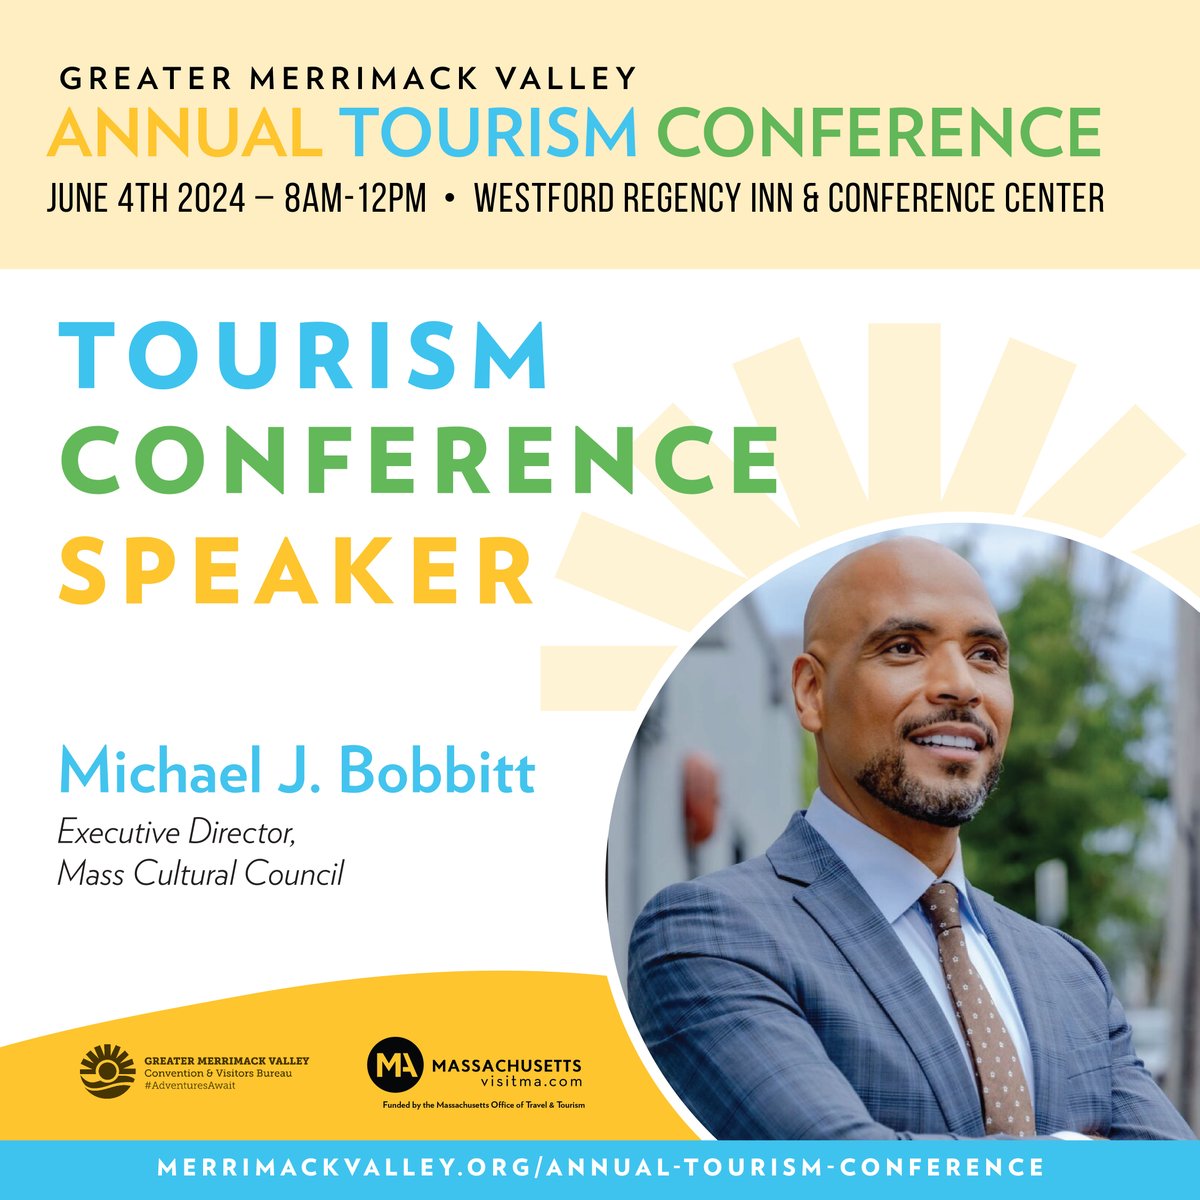 🌟 Spotlight on Michael J. Bobbitt! 🌟 We're excited to welcome Michael J. Bobbitt, Executive Director of @MassCultural Council, as a distinguished speaker at the 2024 Annual Tourism Conference. merrimackvalley.org/annual-tourism… #MerrimackValley